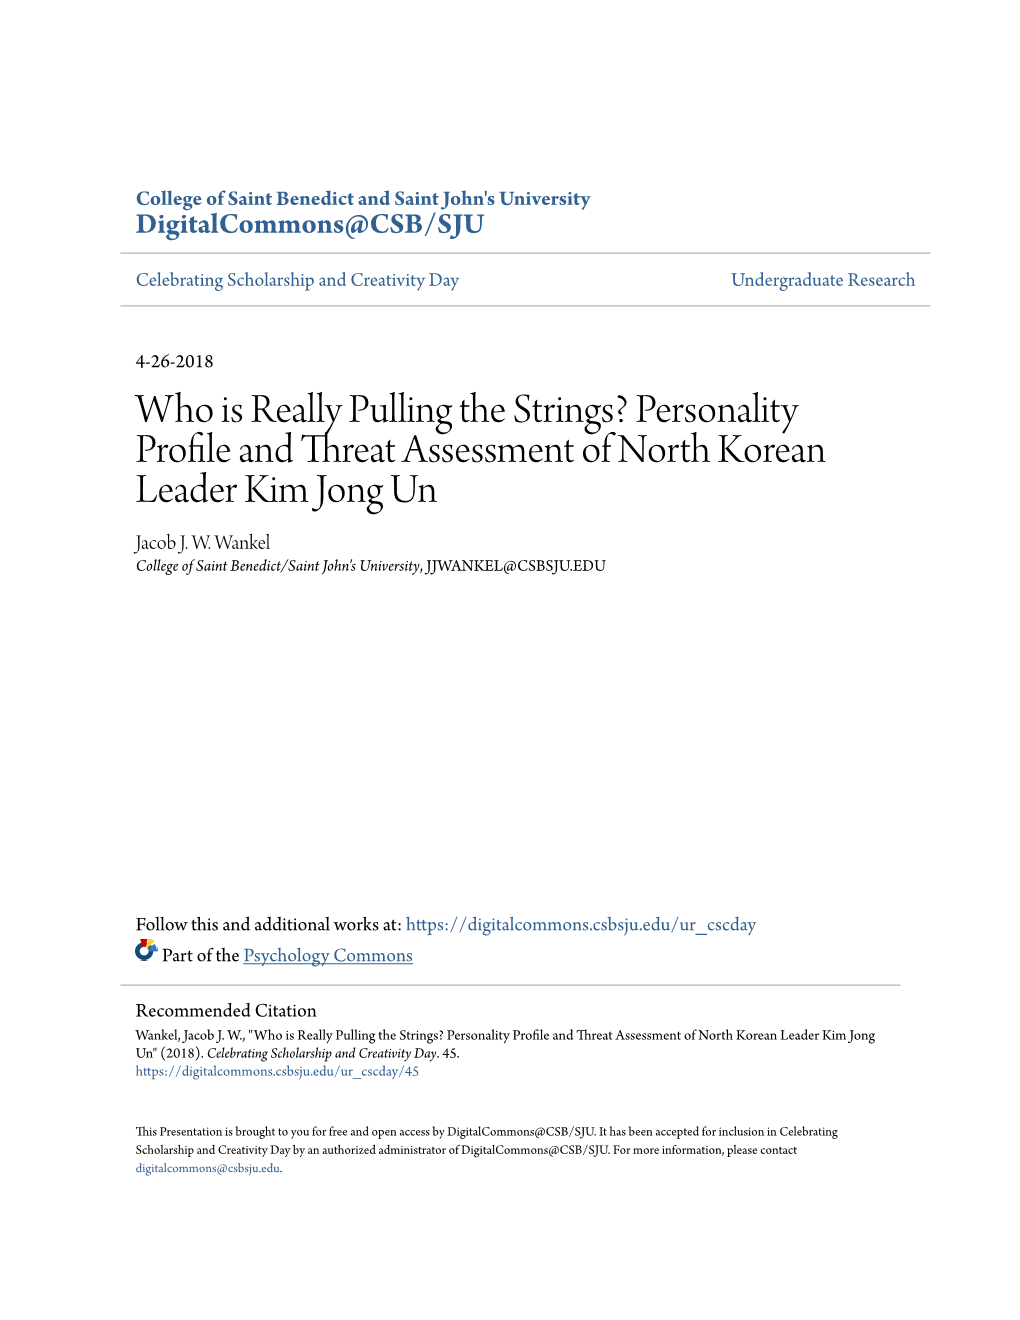 Who Is Really Pulling the Strings? Personality Profile and Threat Assessment of North Korean Leader Kim Jong Un Jacob J